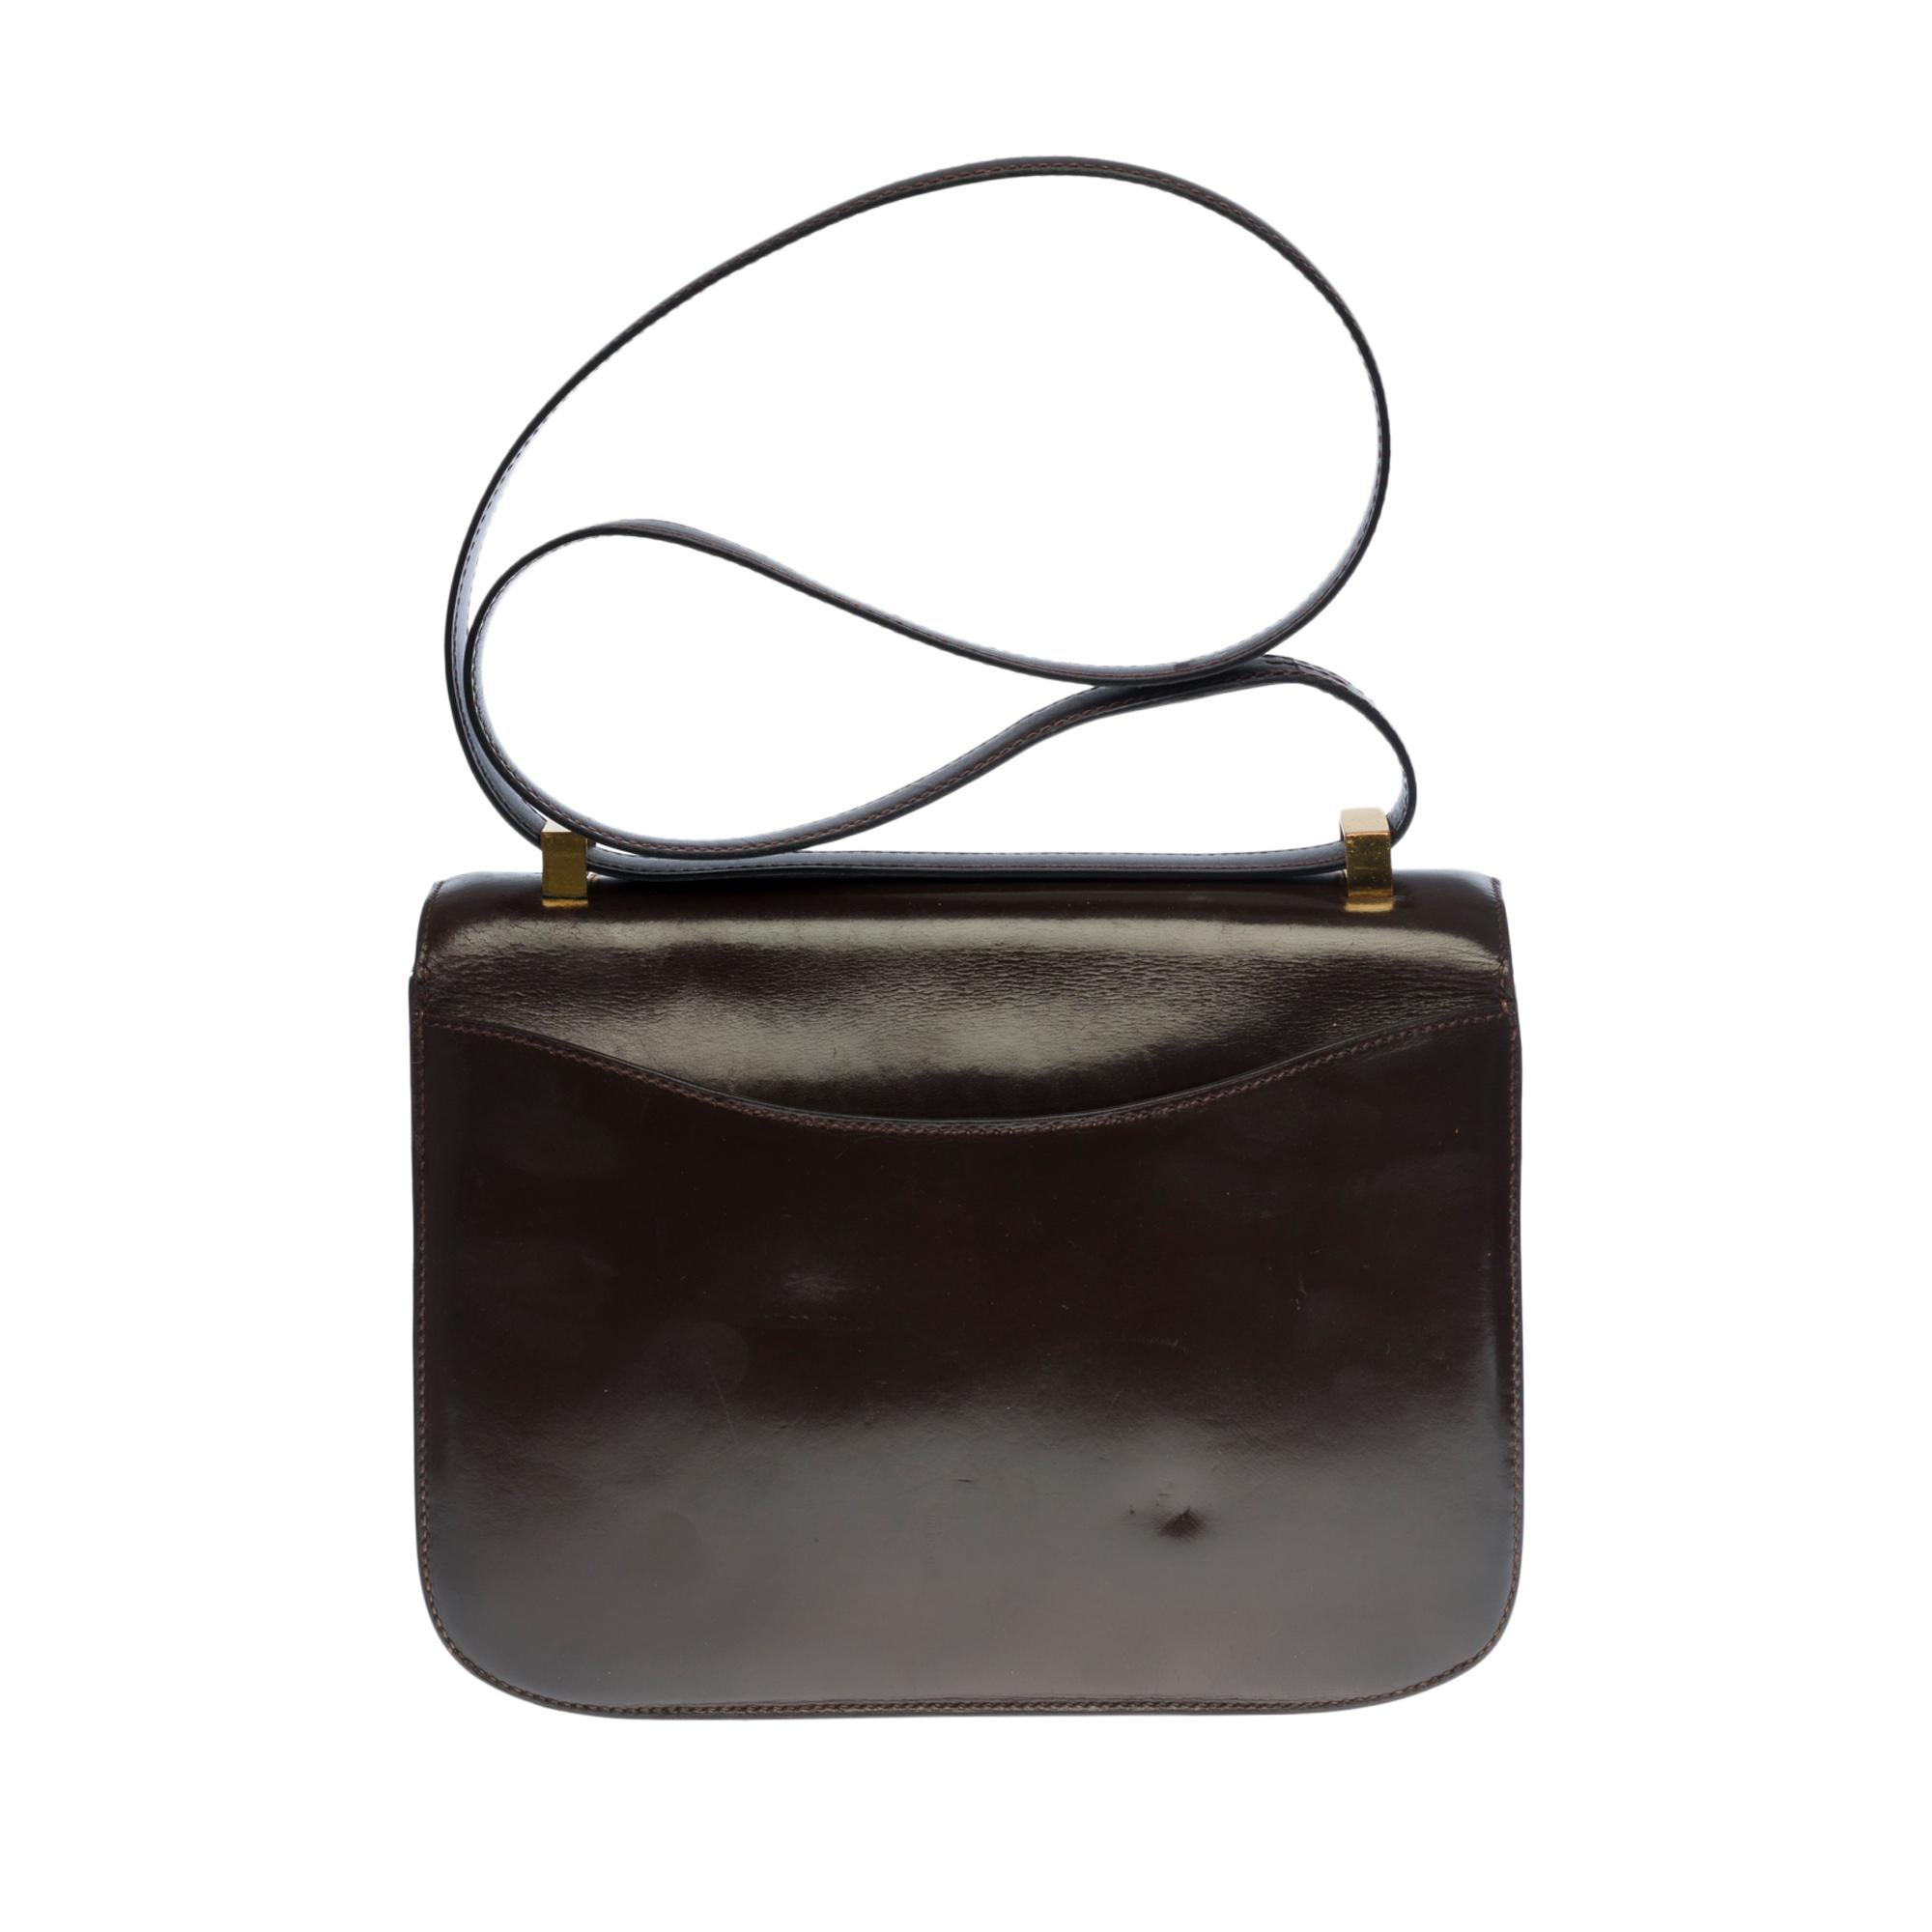 Splendid Hermes Constance Handbag 23 cm in brown box leather, gold metal hardware, brown leather handle transformable allowing a hand or shoulder support.
Vintage bag.
Closure marked H on flap.
A patch pocket on the back of the bag.
Lining in brown